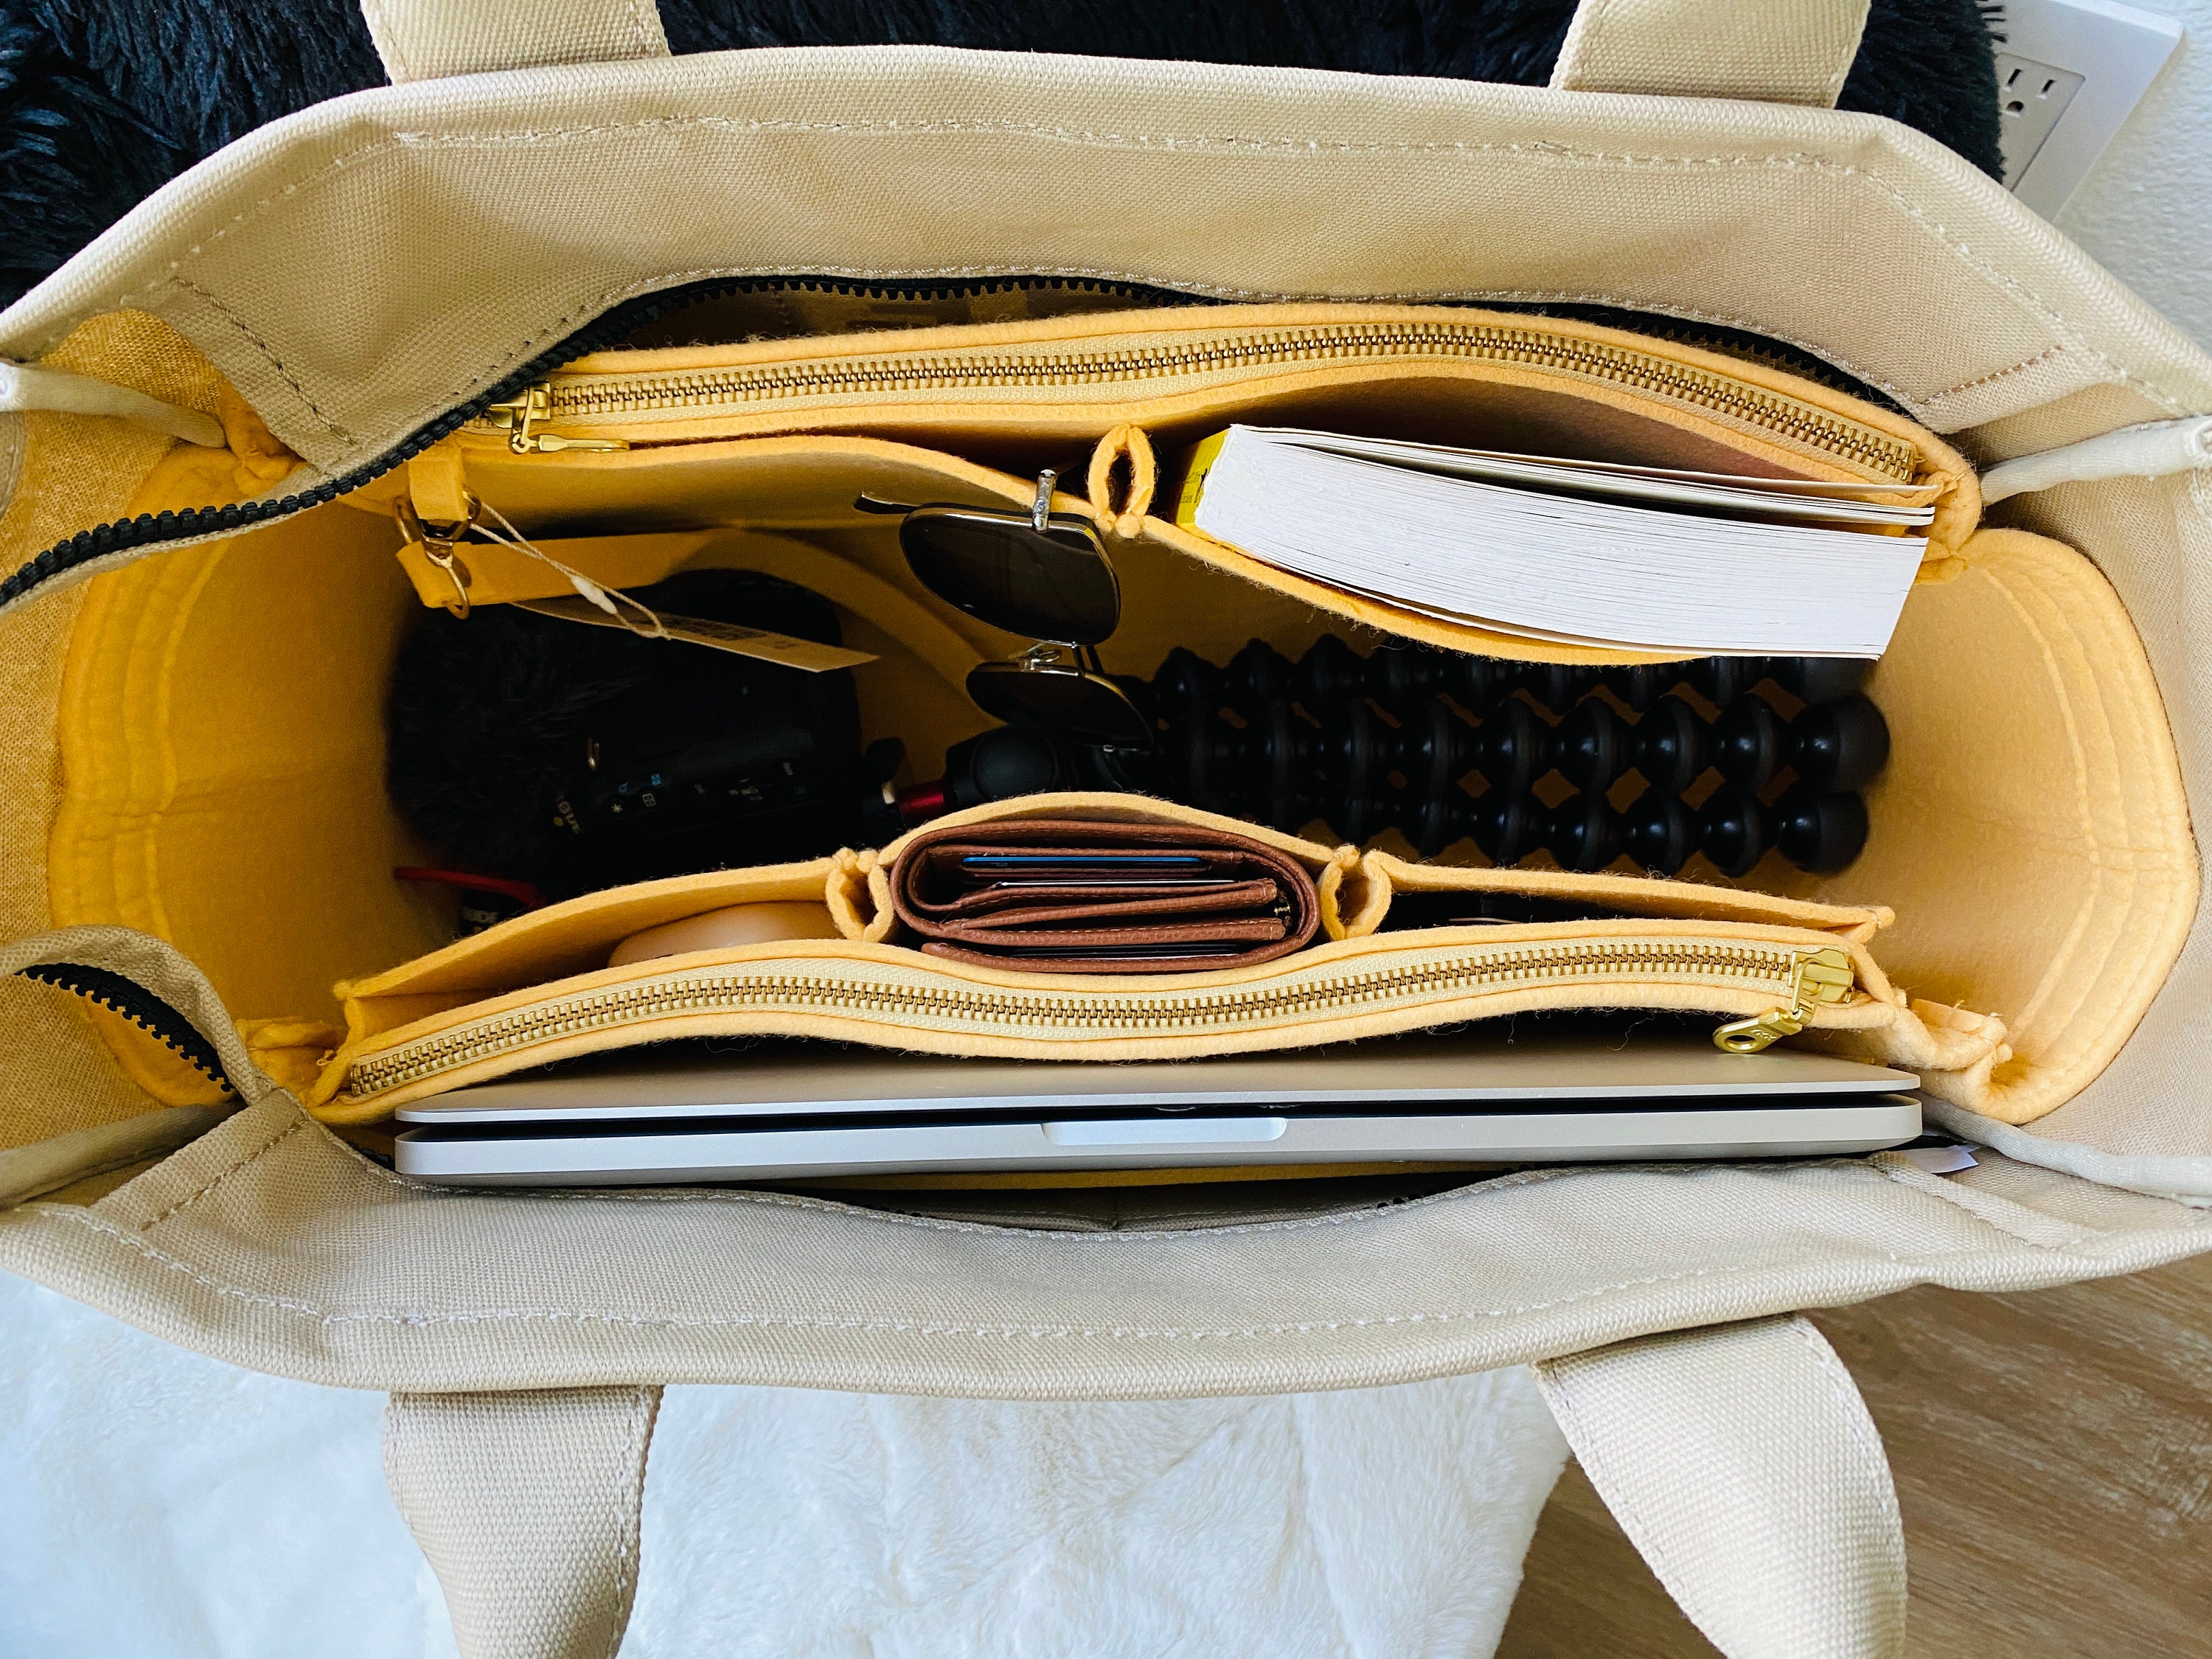  AlgorithmBags Purse Organizer Insert with zippers